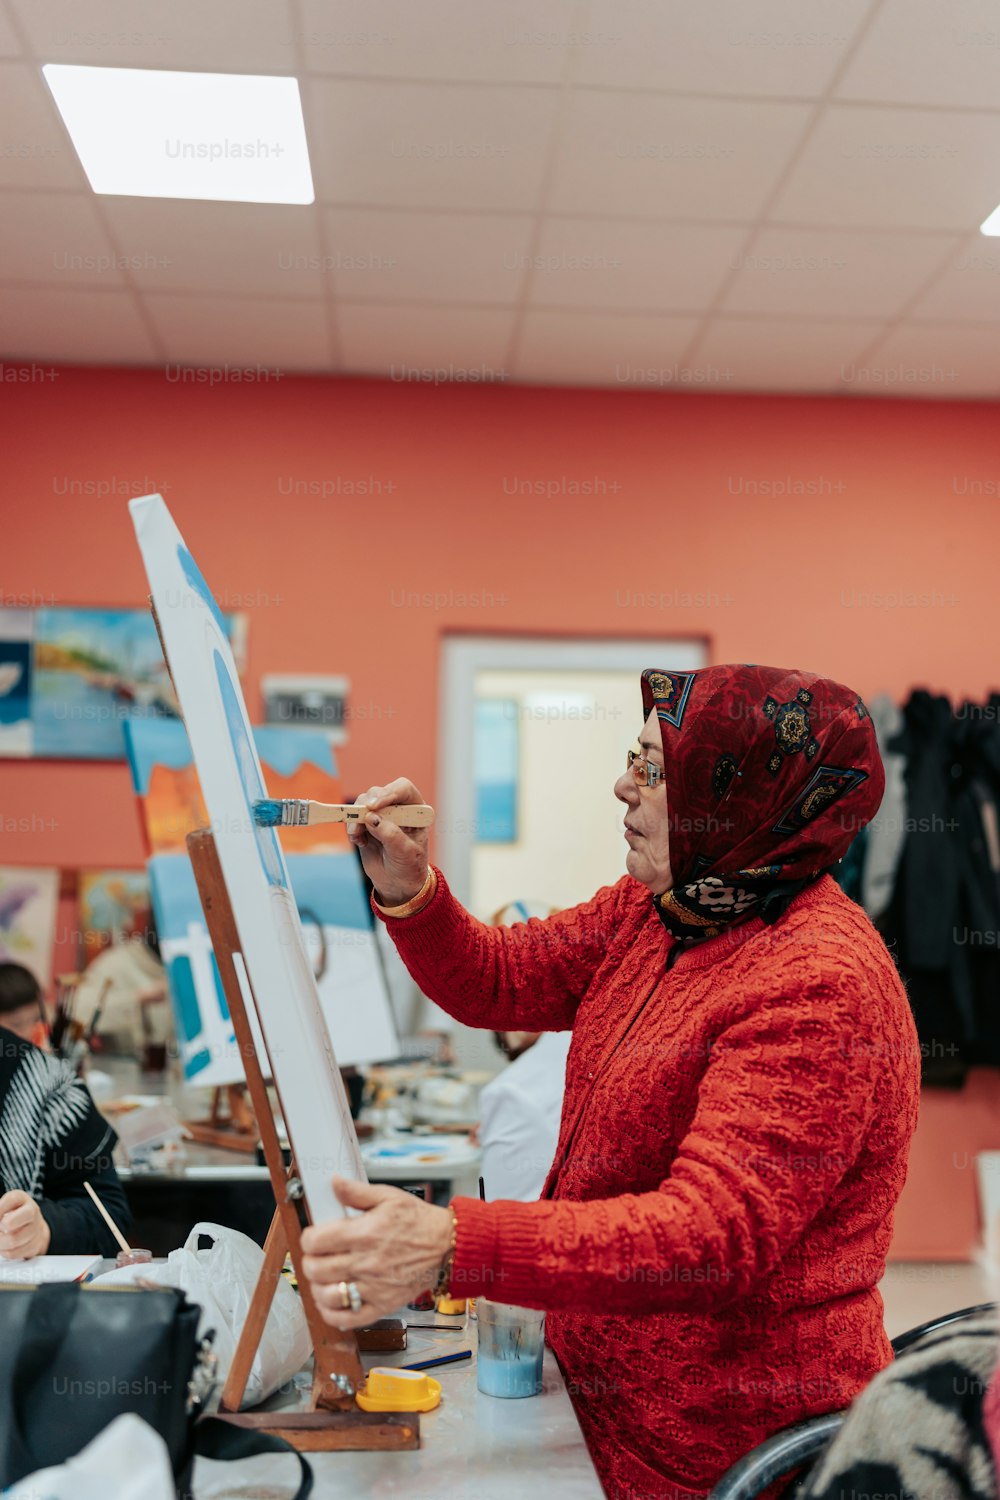 a woman in a red jacket is painting on a easel